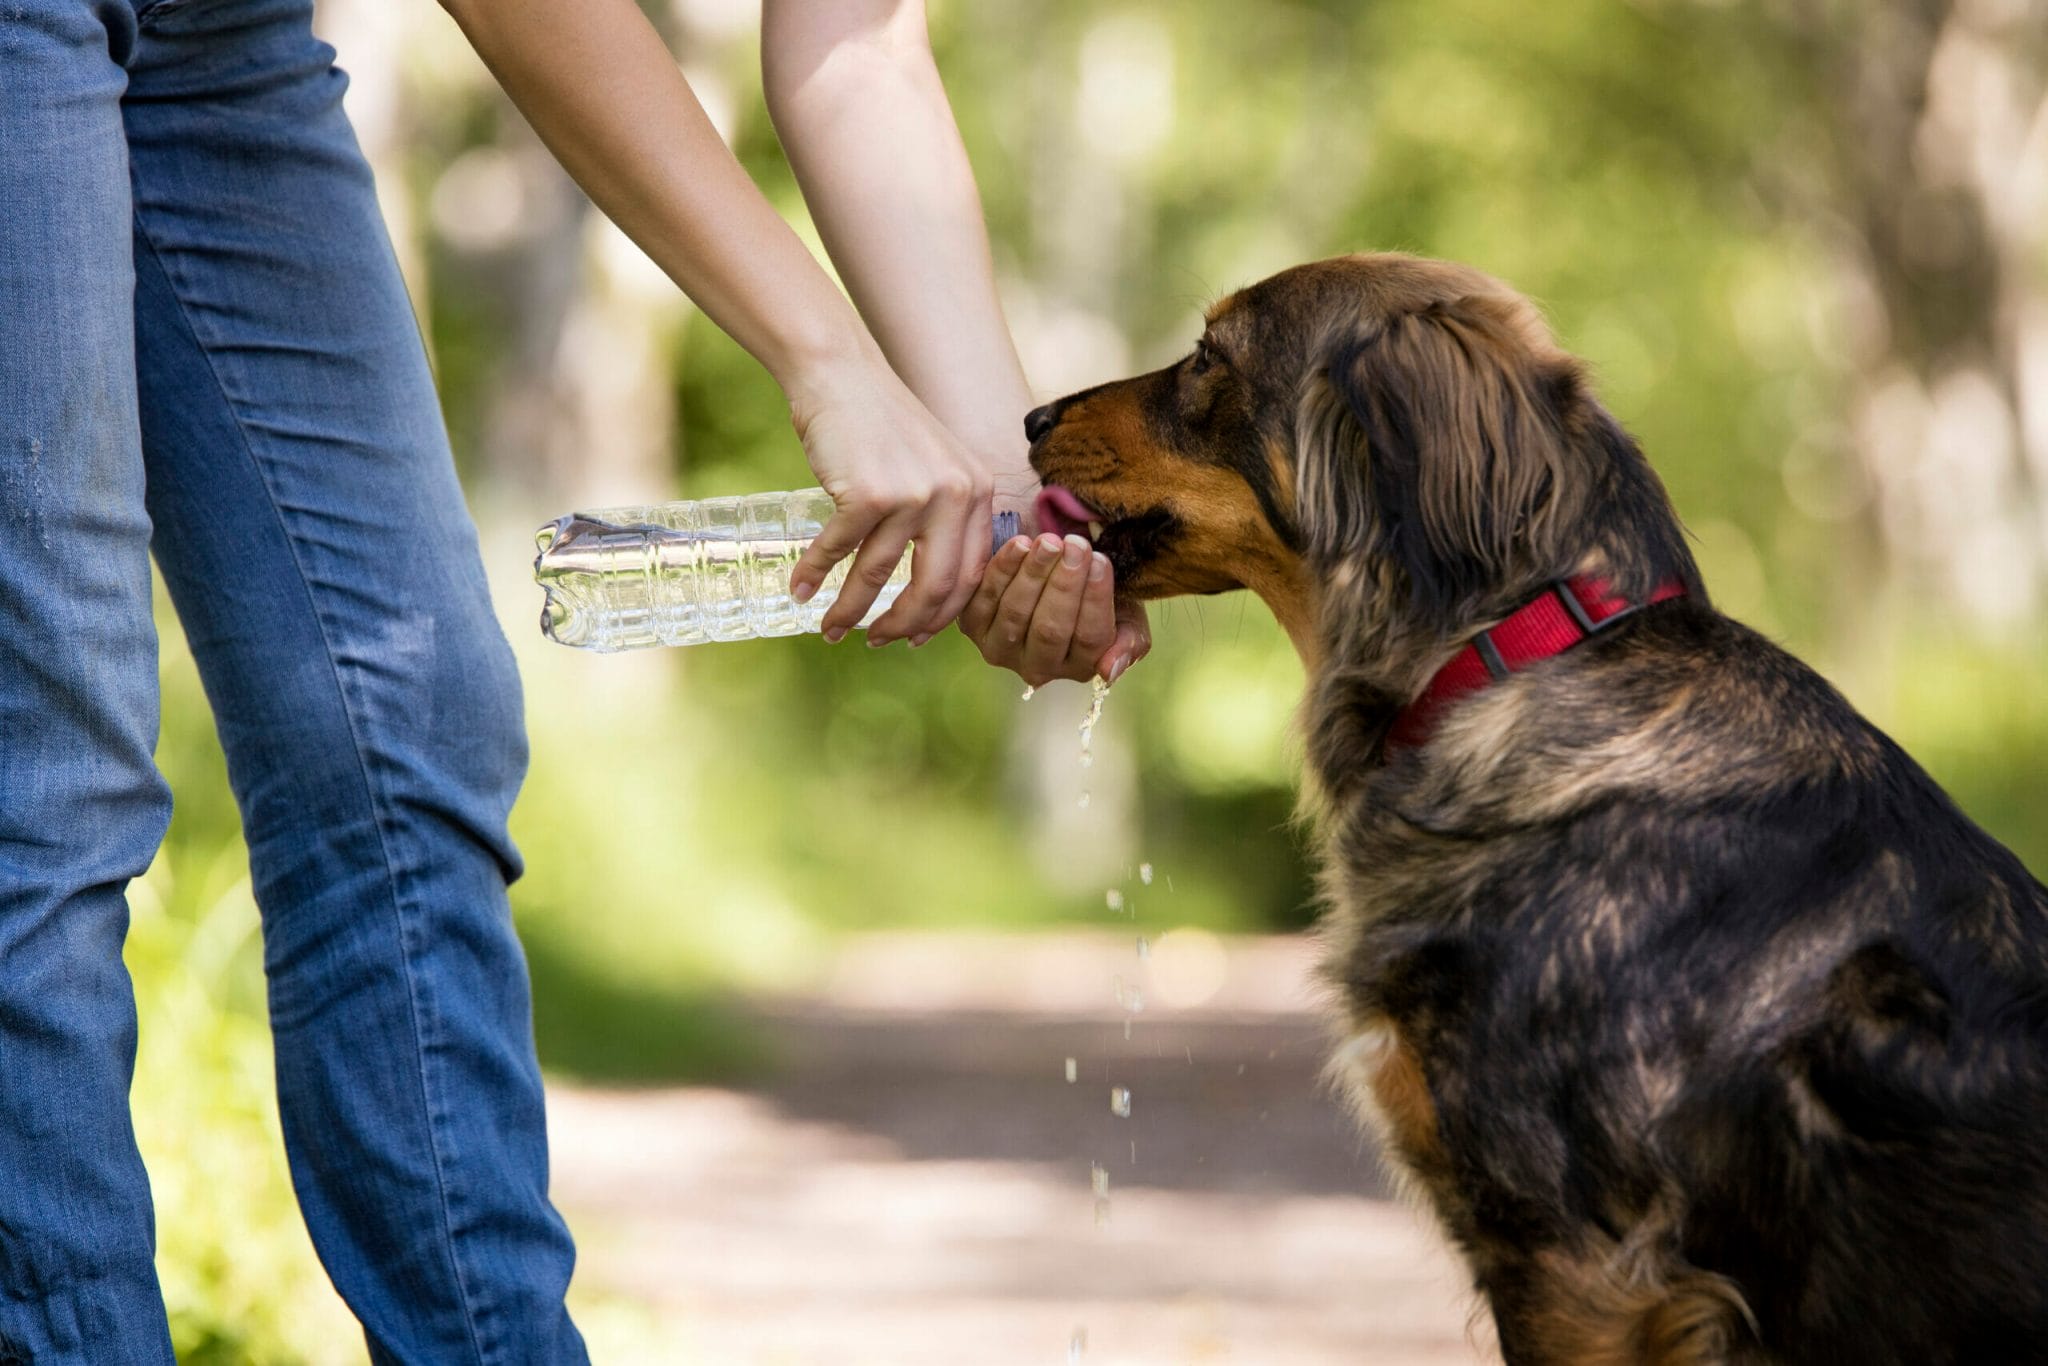 Can you get sick from sharing water with a dog?